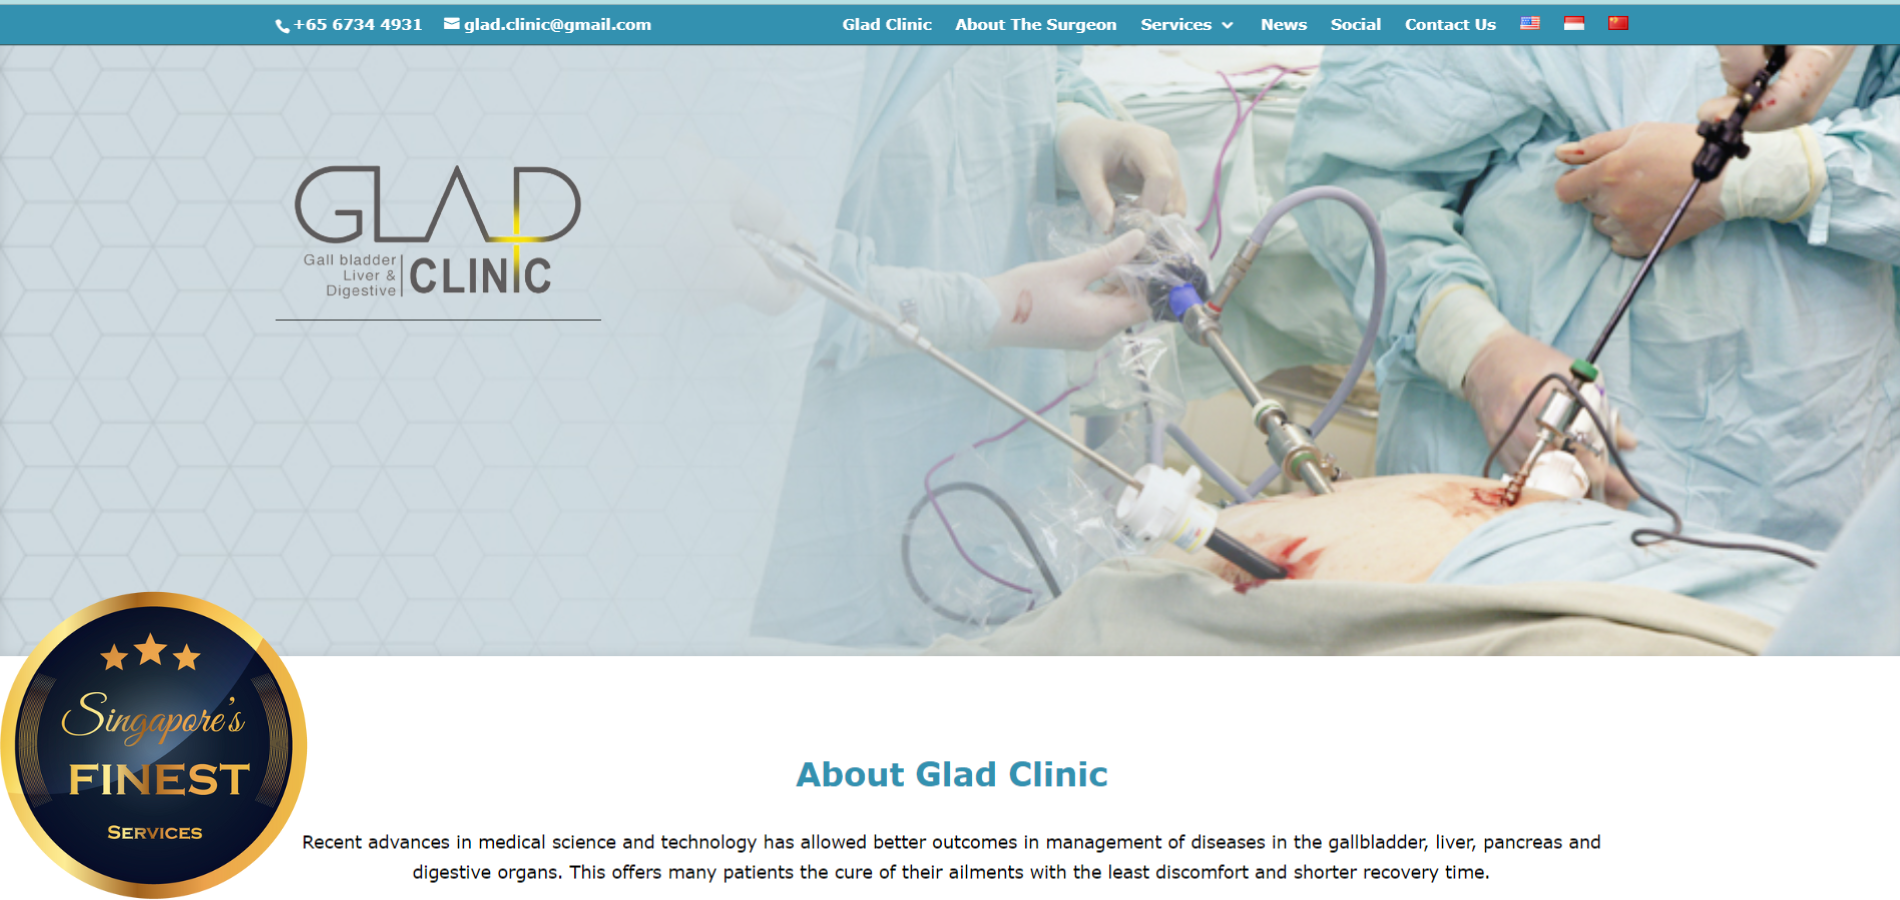 The Finest Clinics For Hepatobiliary Surgery in Singapore